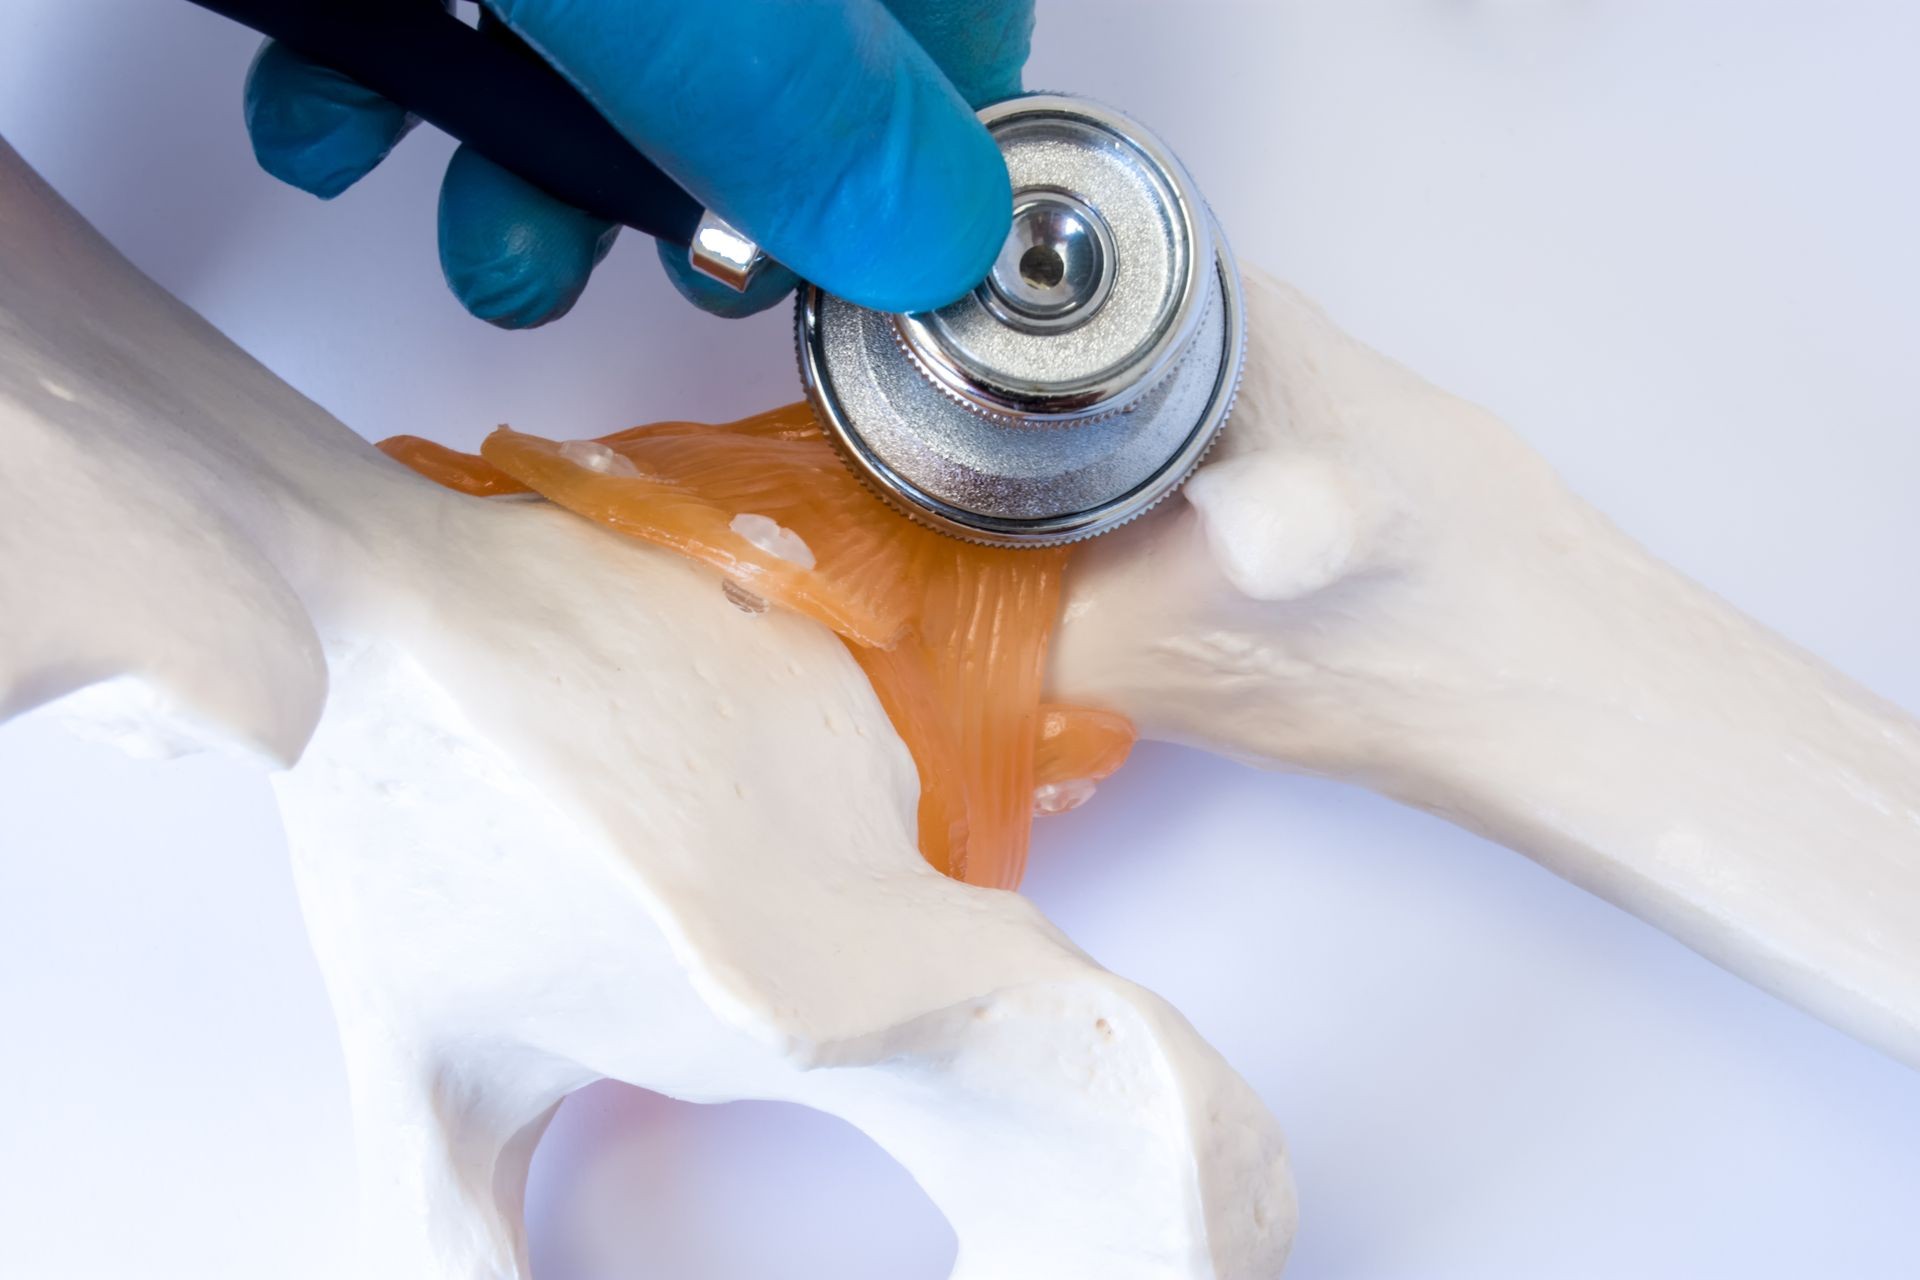 Traumatologist examines stethoscope femur and hip joint. Photo for use in orthopedics and traumatology, symbol process of diagnosing diseases musculoskeletal system, tendons, suspensory ligament